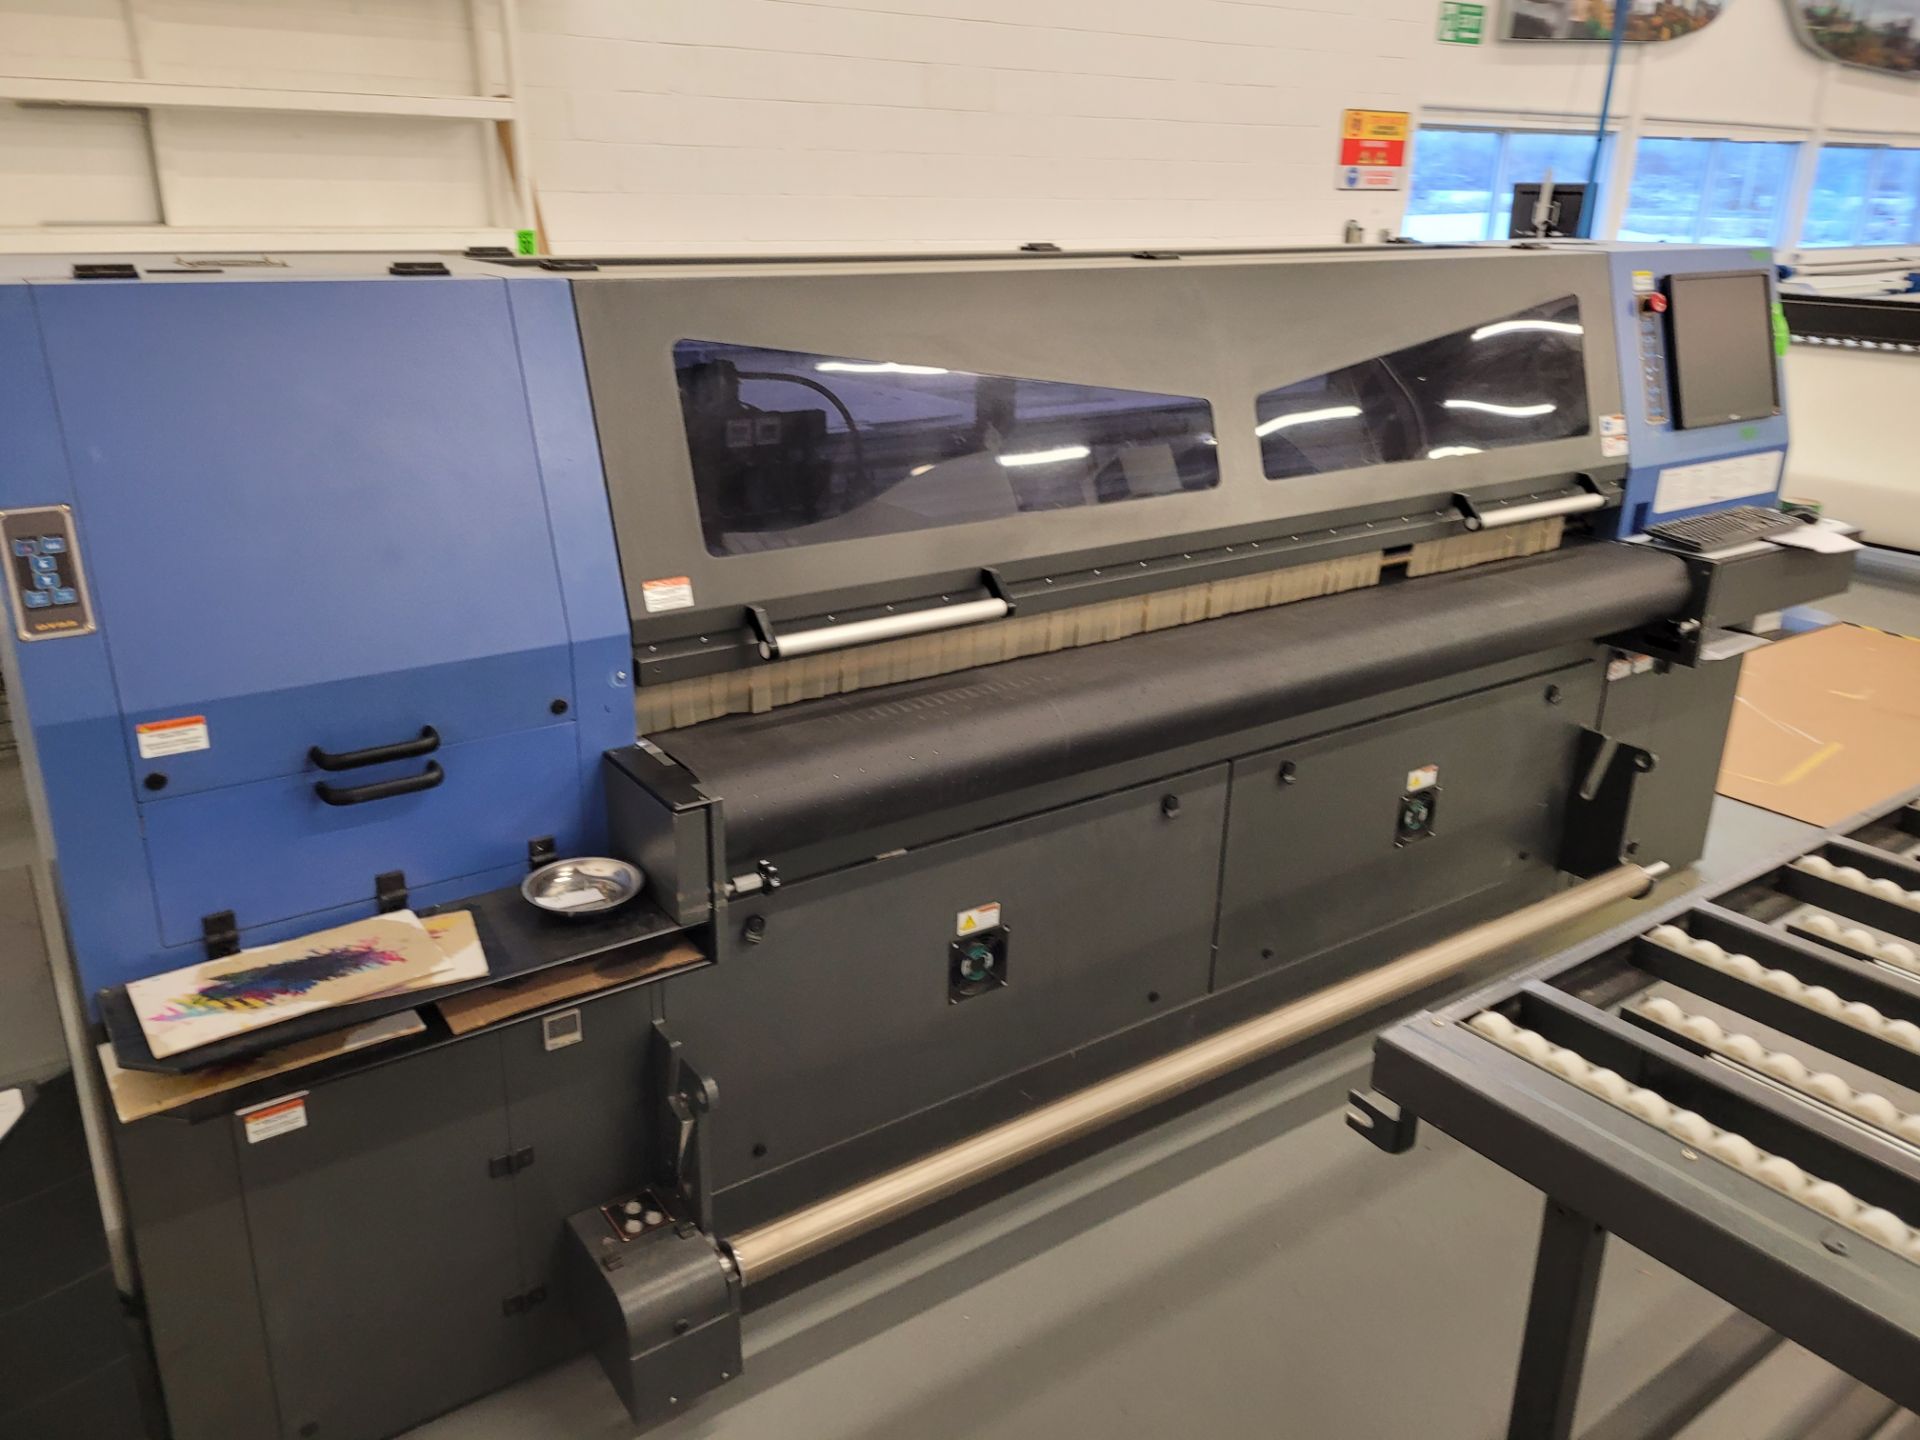 DYSS UV Printing Machine mod. Lasco & Apollo, ser. 221674RR000100264, 220V, includes conveyors and - Image 33 of 37